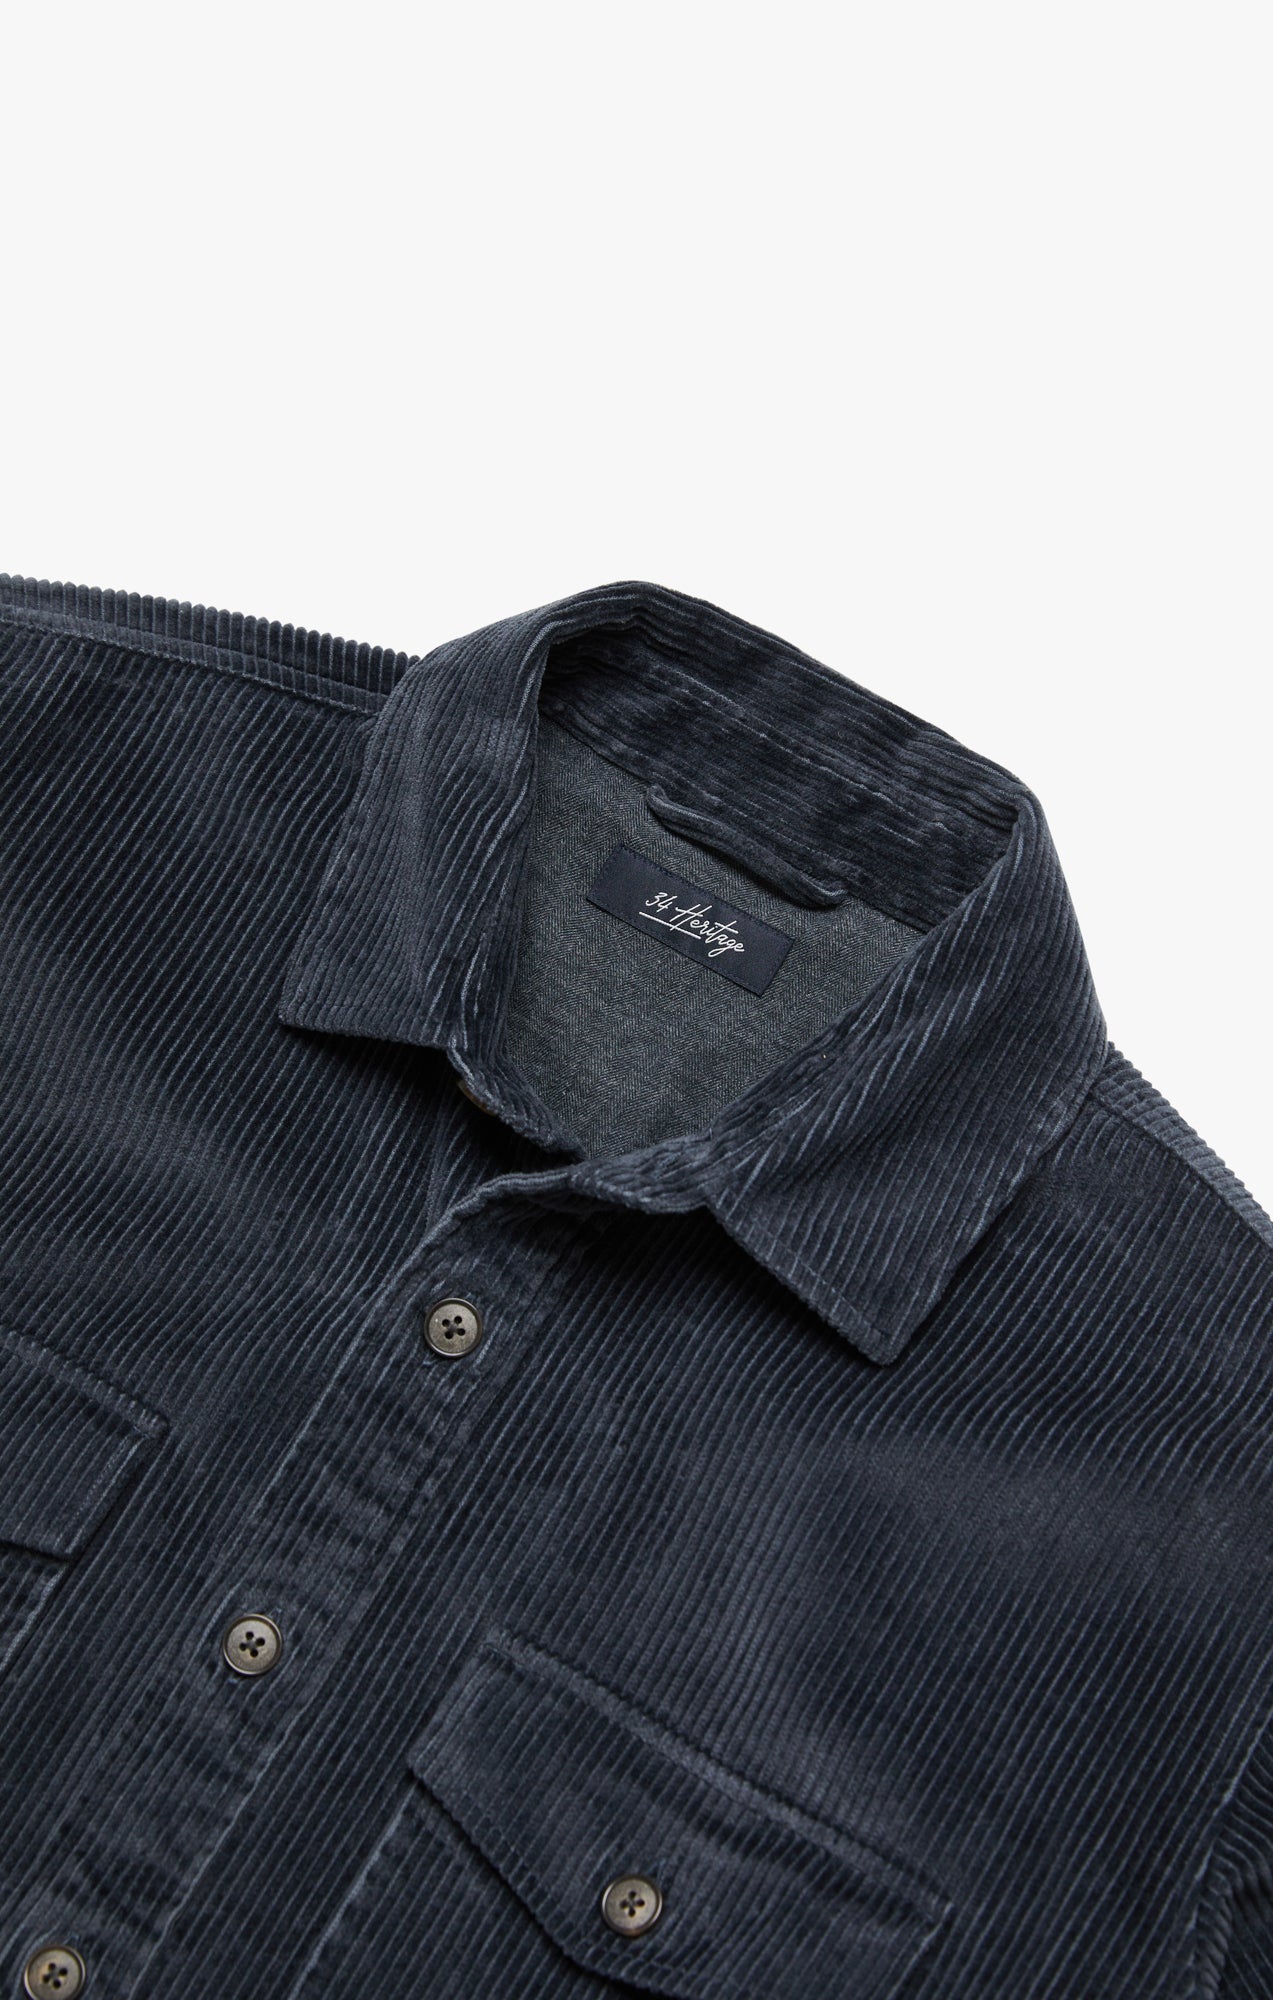 Overshirt In Charcoal Image 10